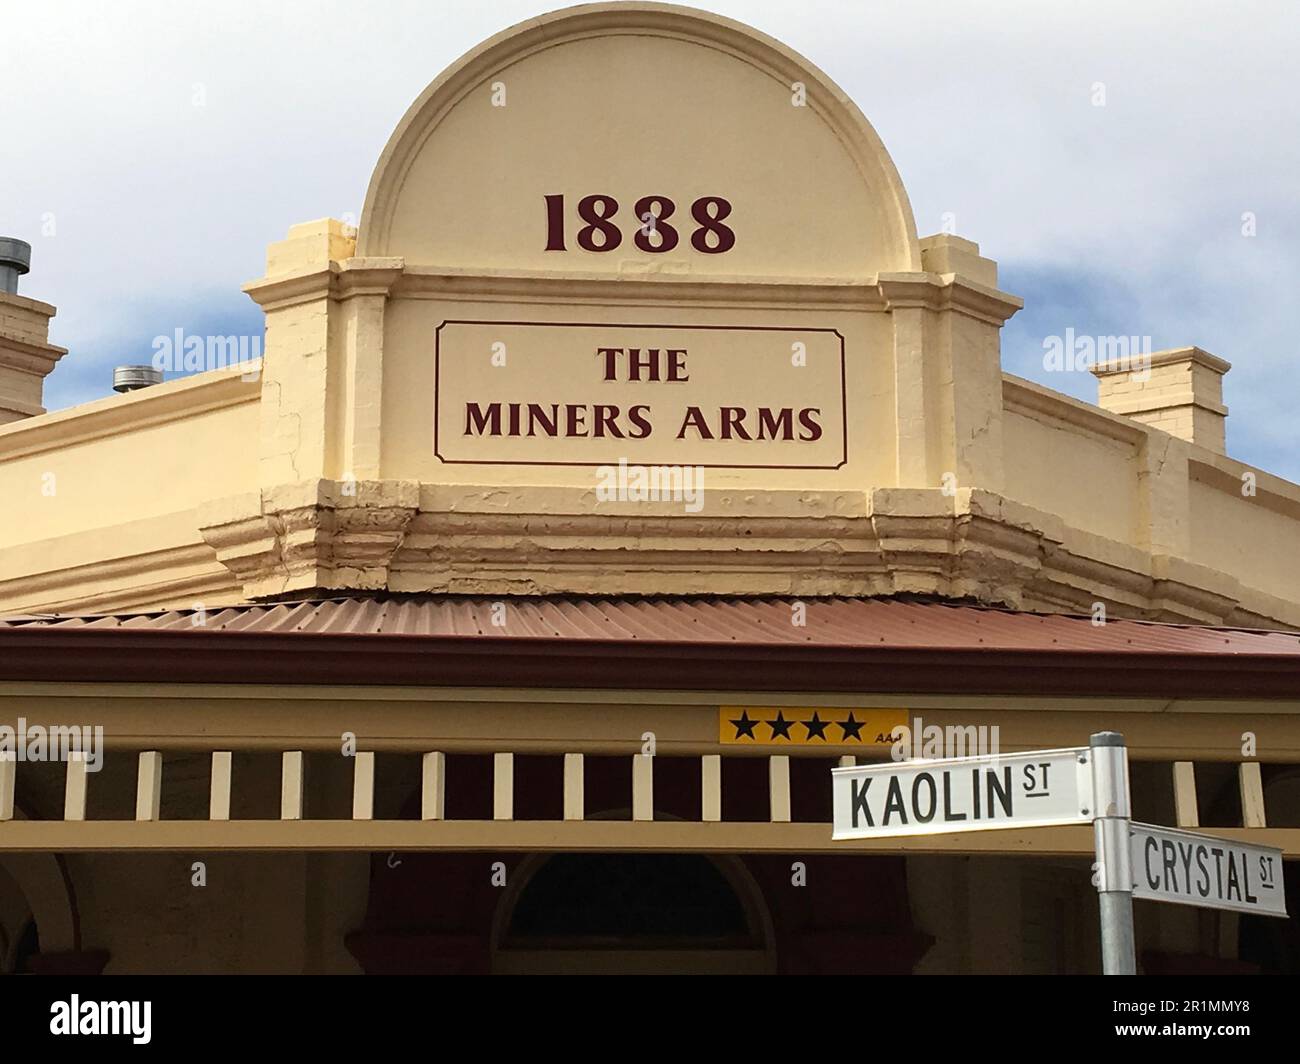 Miners Arms pub built 1888, Broken Hill, central NSW Australia Stock Photo